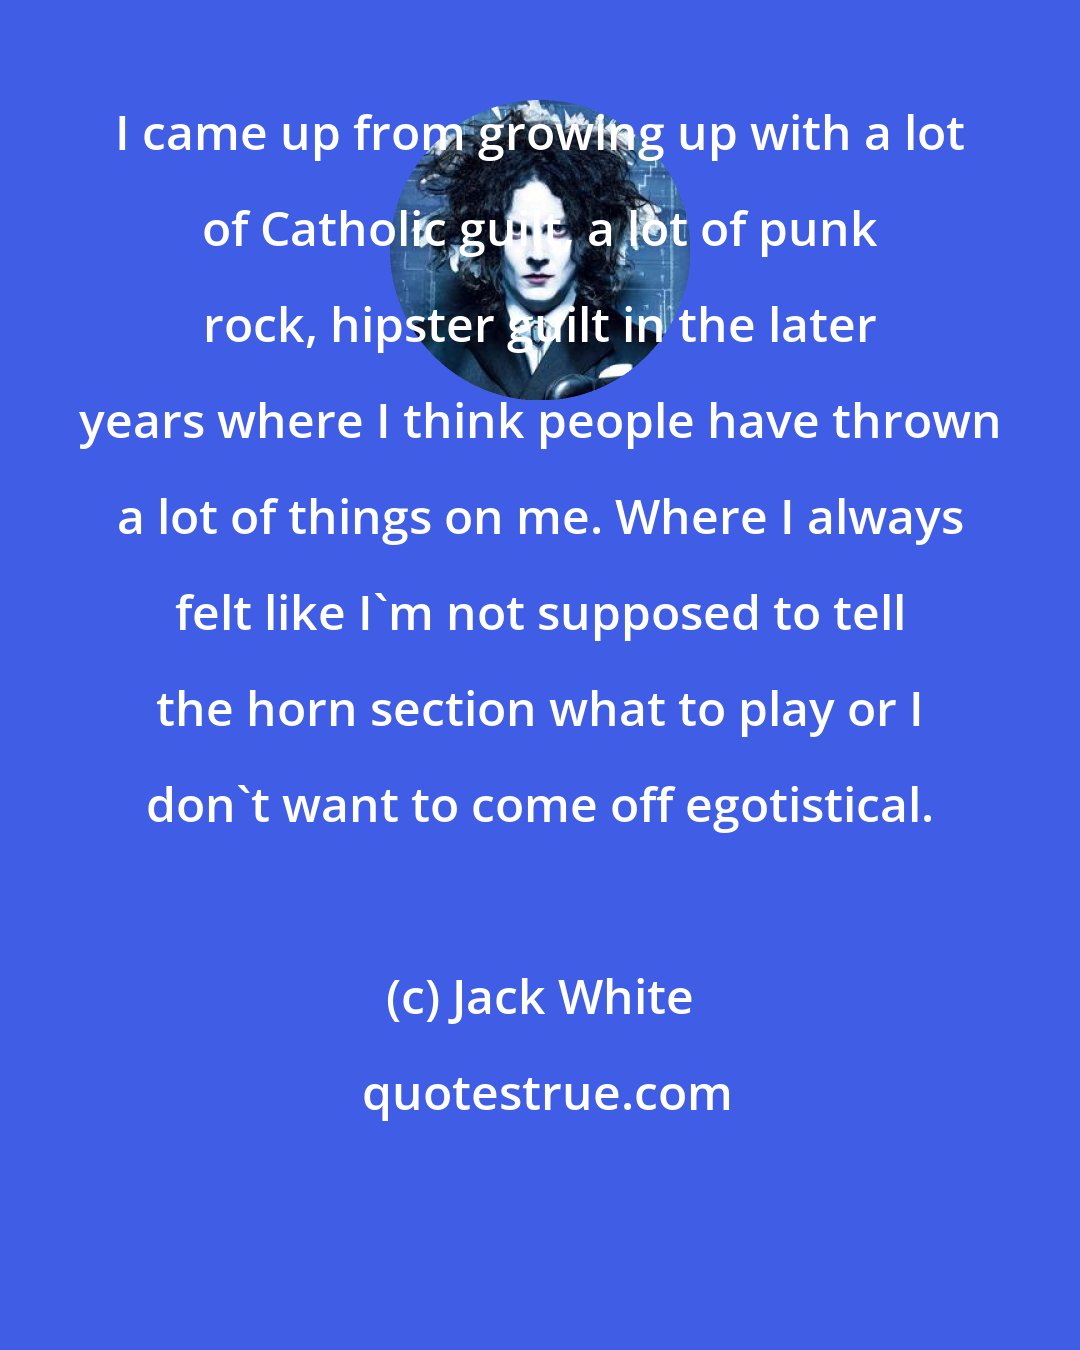 Jack White: I came up from growing up with a lot of Catholic guilt, a lot of punk rock, hipster guilt in the later years where I think people have thrown a lot of things on me. Where I always felt like I'm not supposed to tell the horn section what to play or I don't want to come off egotistical.